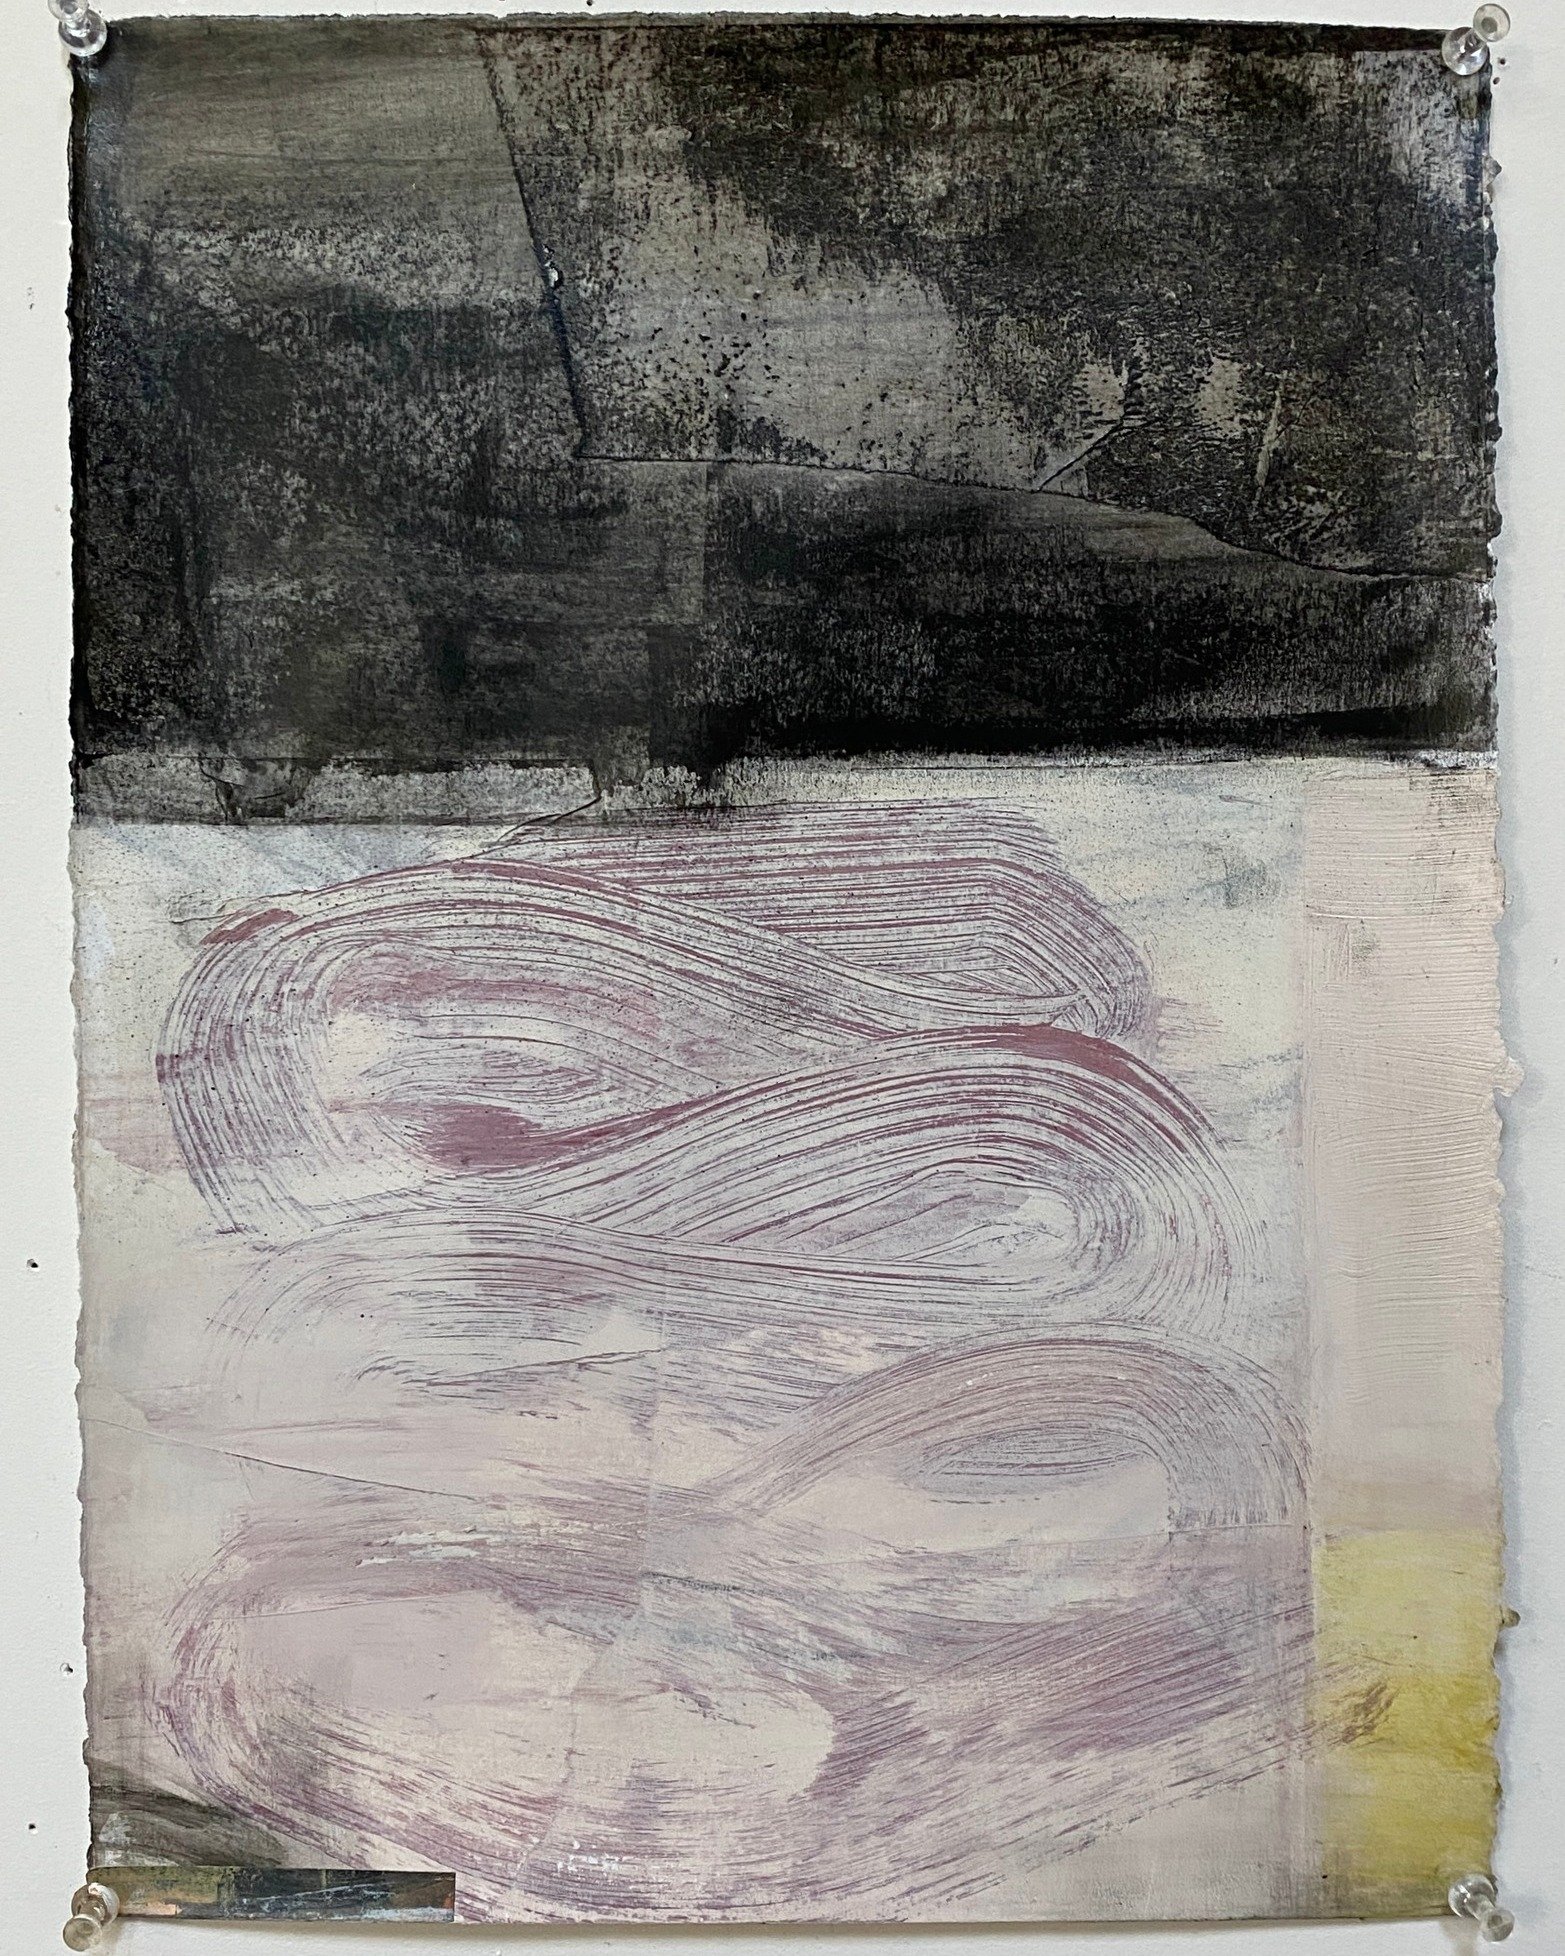 Further explorations on paper...finding relationships through direct and indirect applications of acrylic paint, paper, charcoal, Stabilo pencil and varnish.
.
15x11 inches on Stonehenge paper